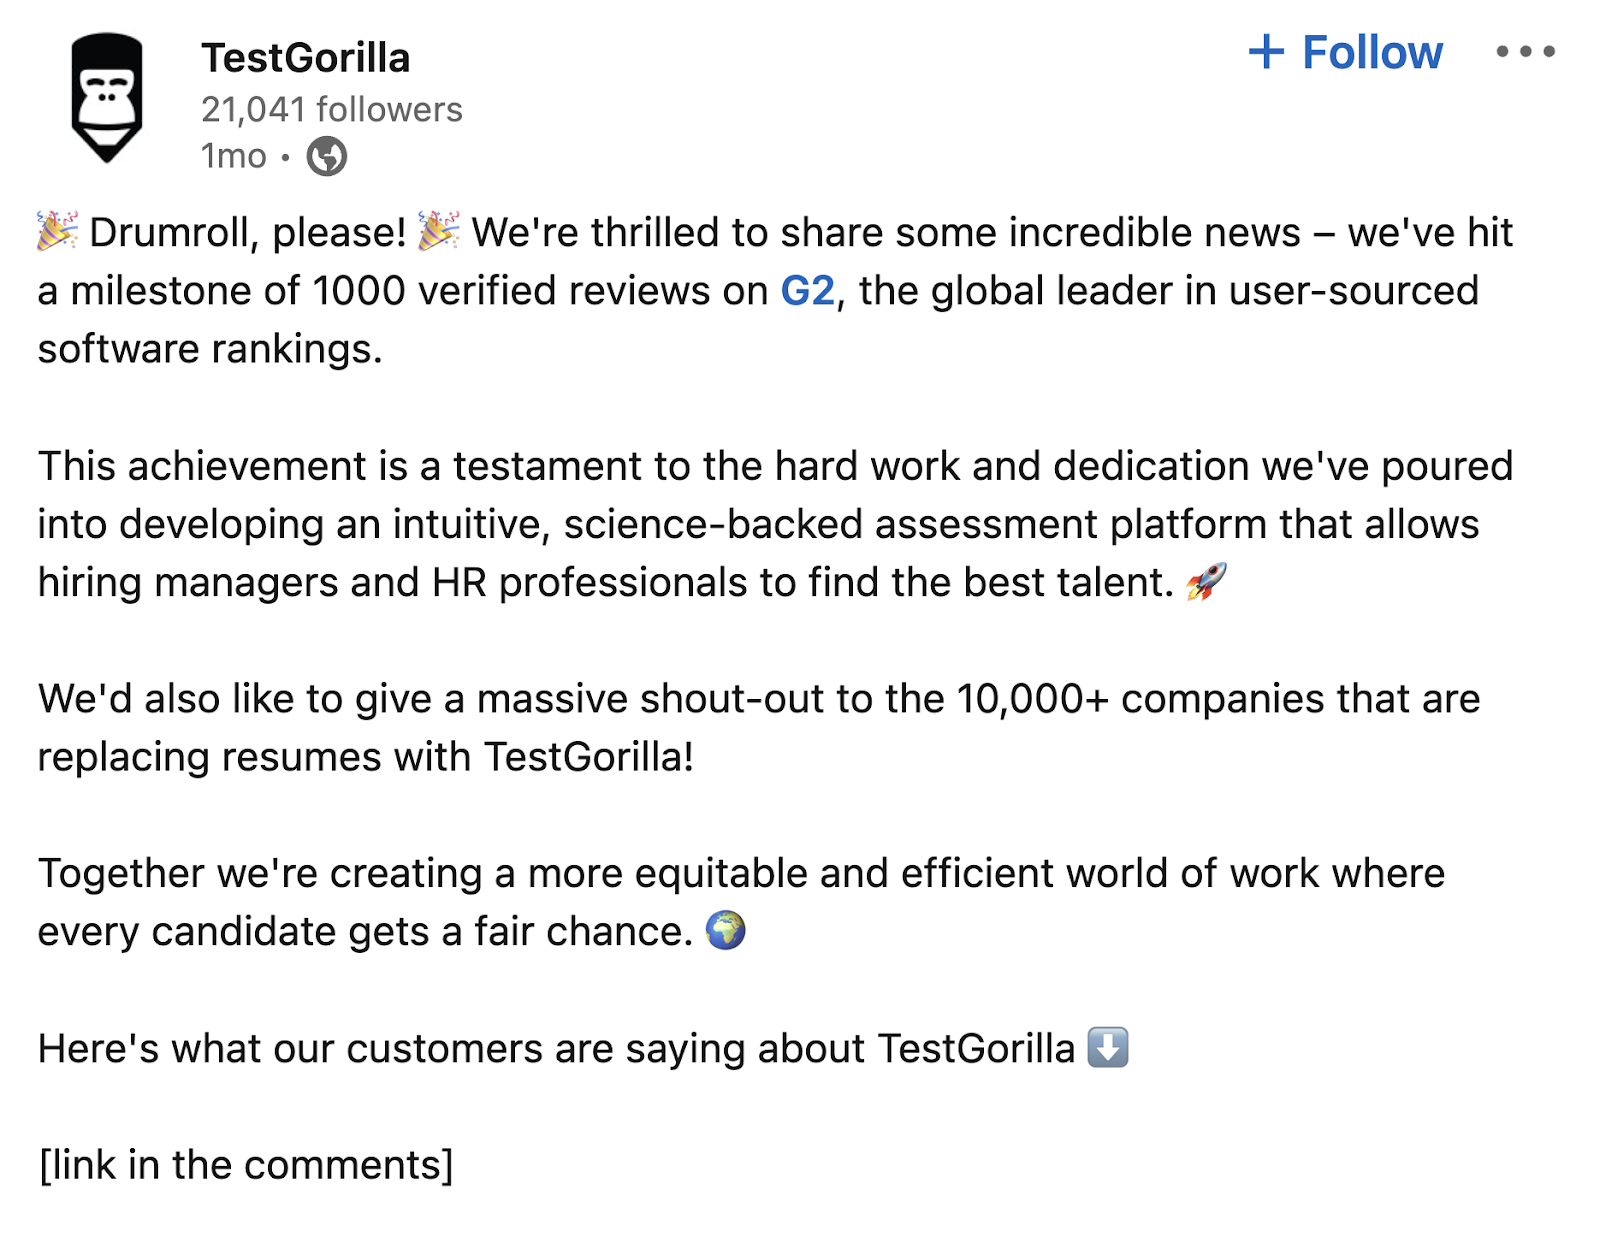 TestGorilla's LinkedIn post sharing the achievement of receiving more than 1,000 verified reviews about their product